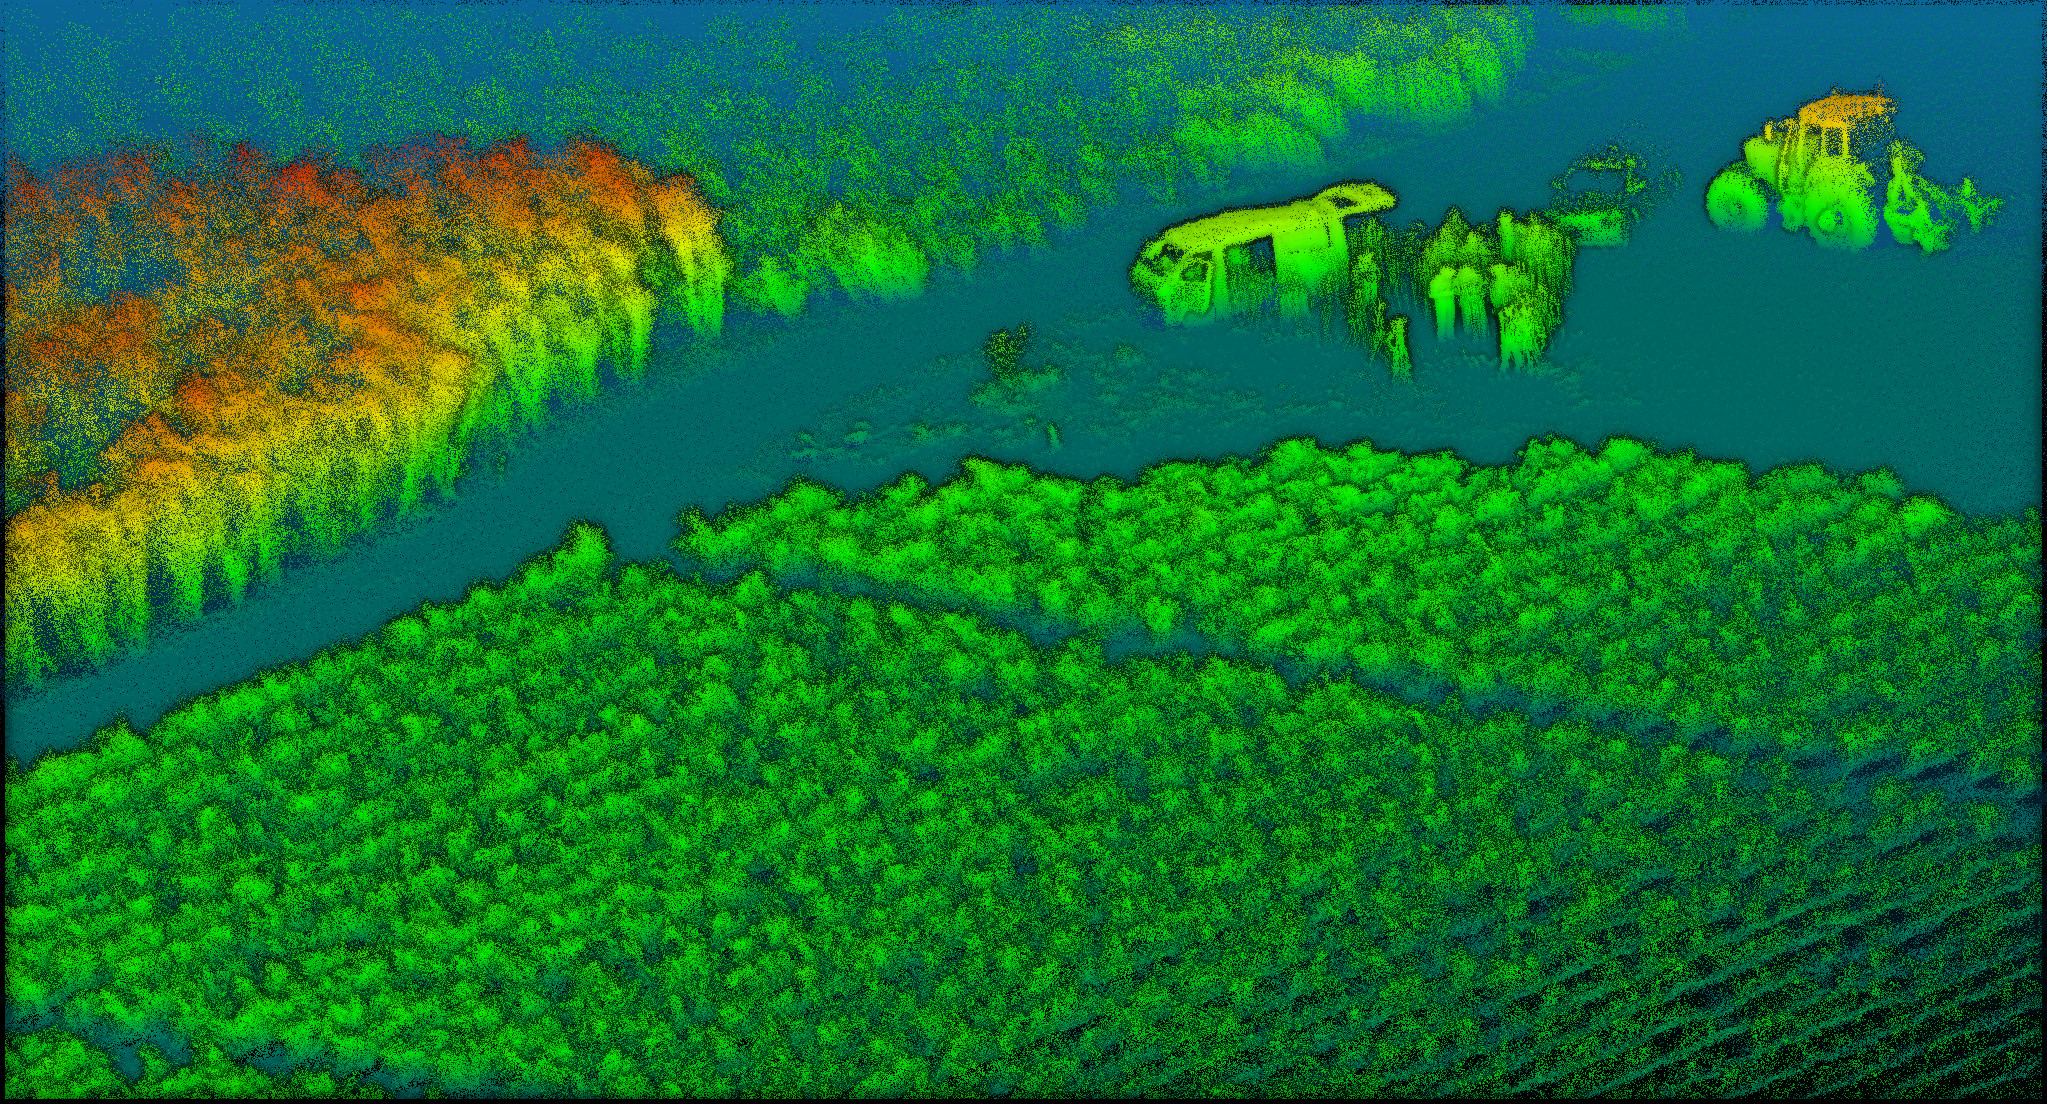 EM2 Image 2 See what the LiDAR sees sugarcane fields surround a group of farmers in Qld